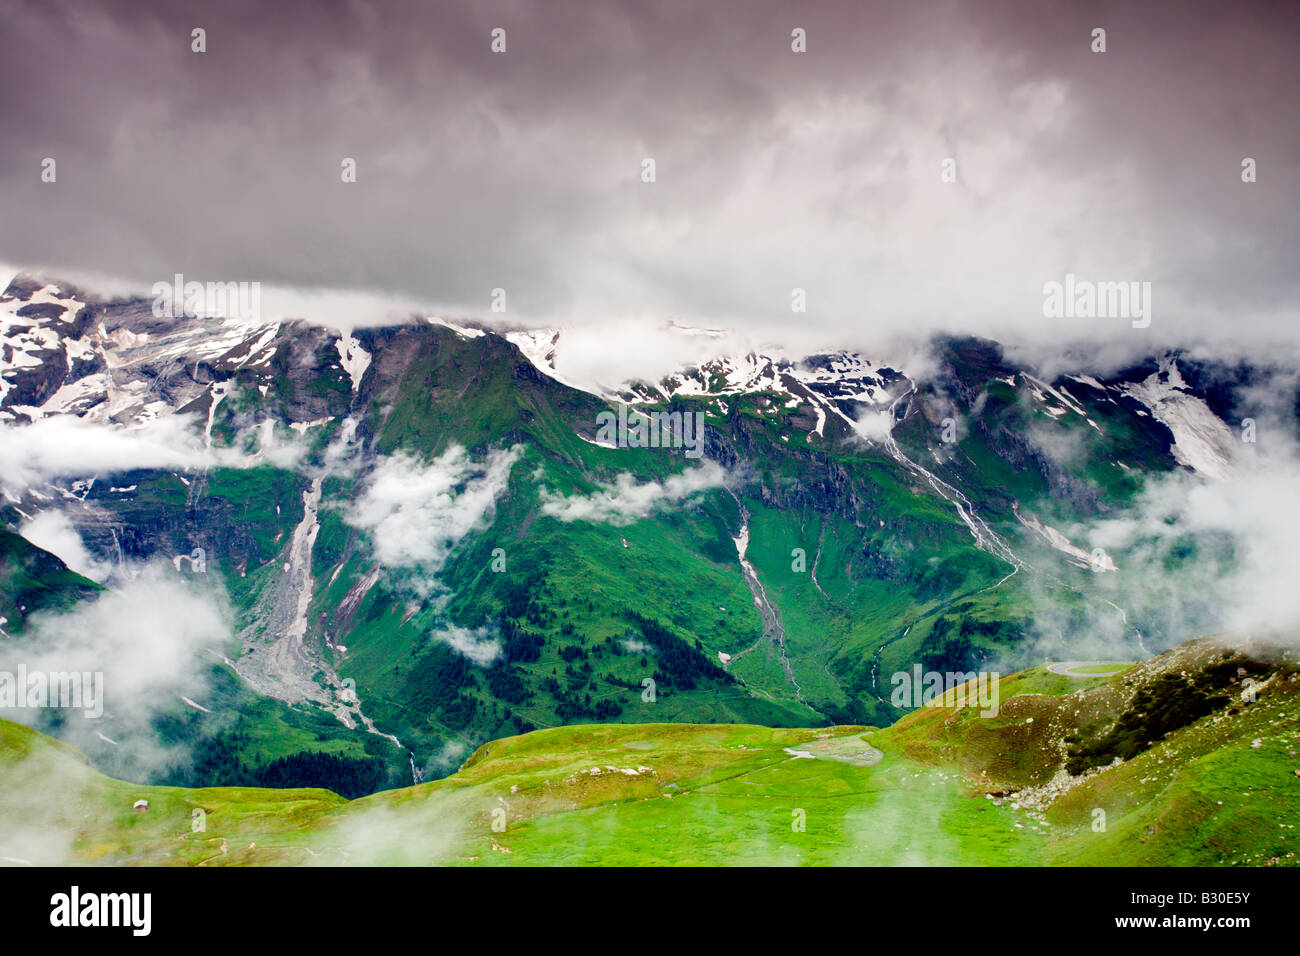 Hohe Tauern National Park: Grossglockner Road: Scenic View Stock Photo